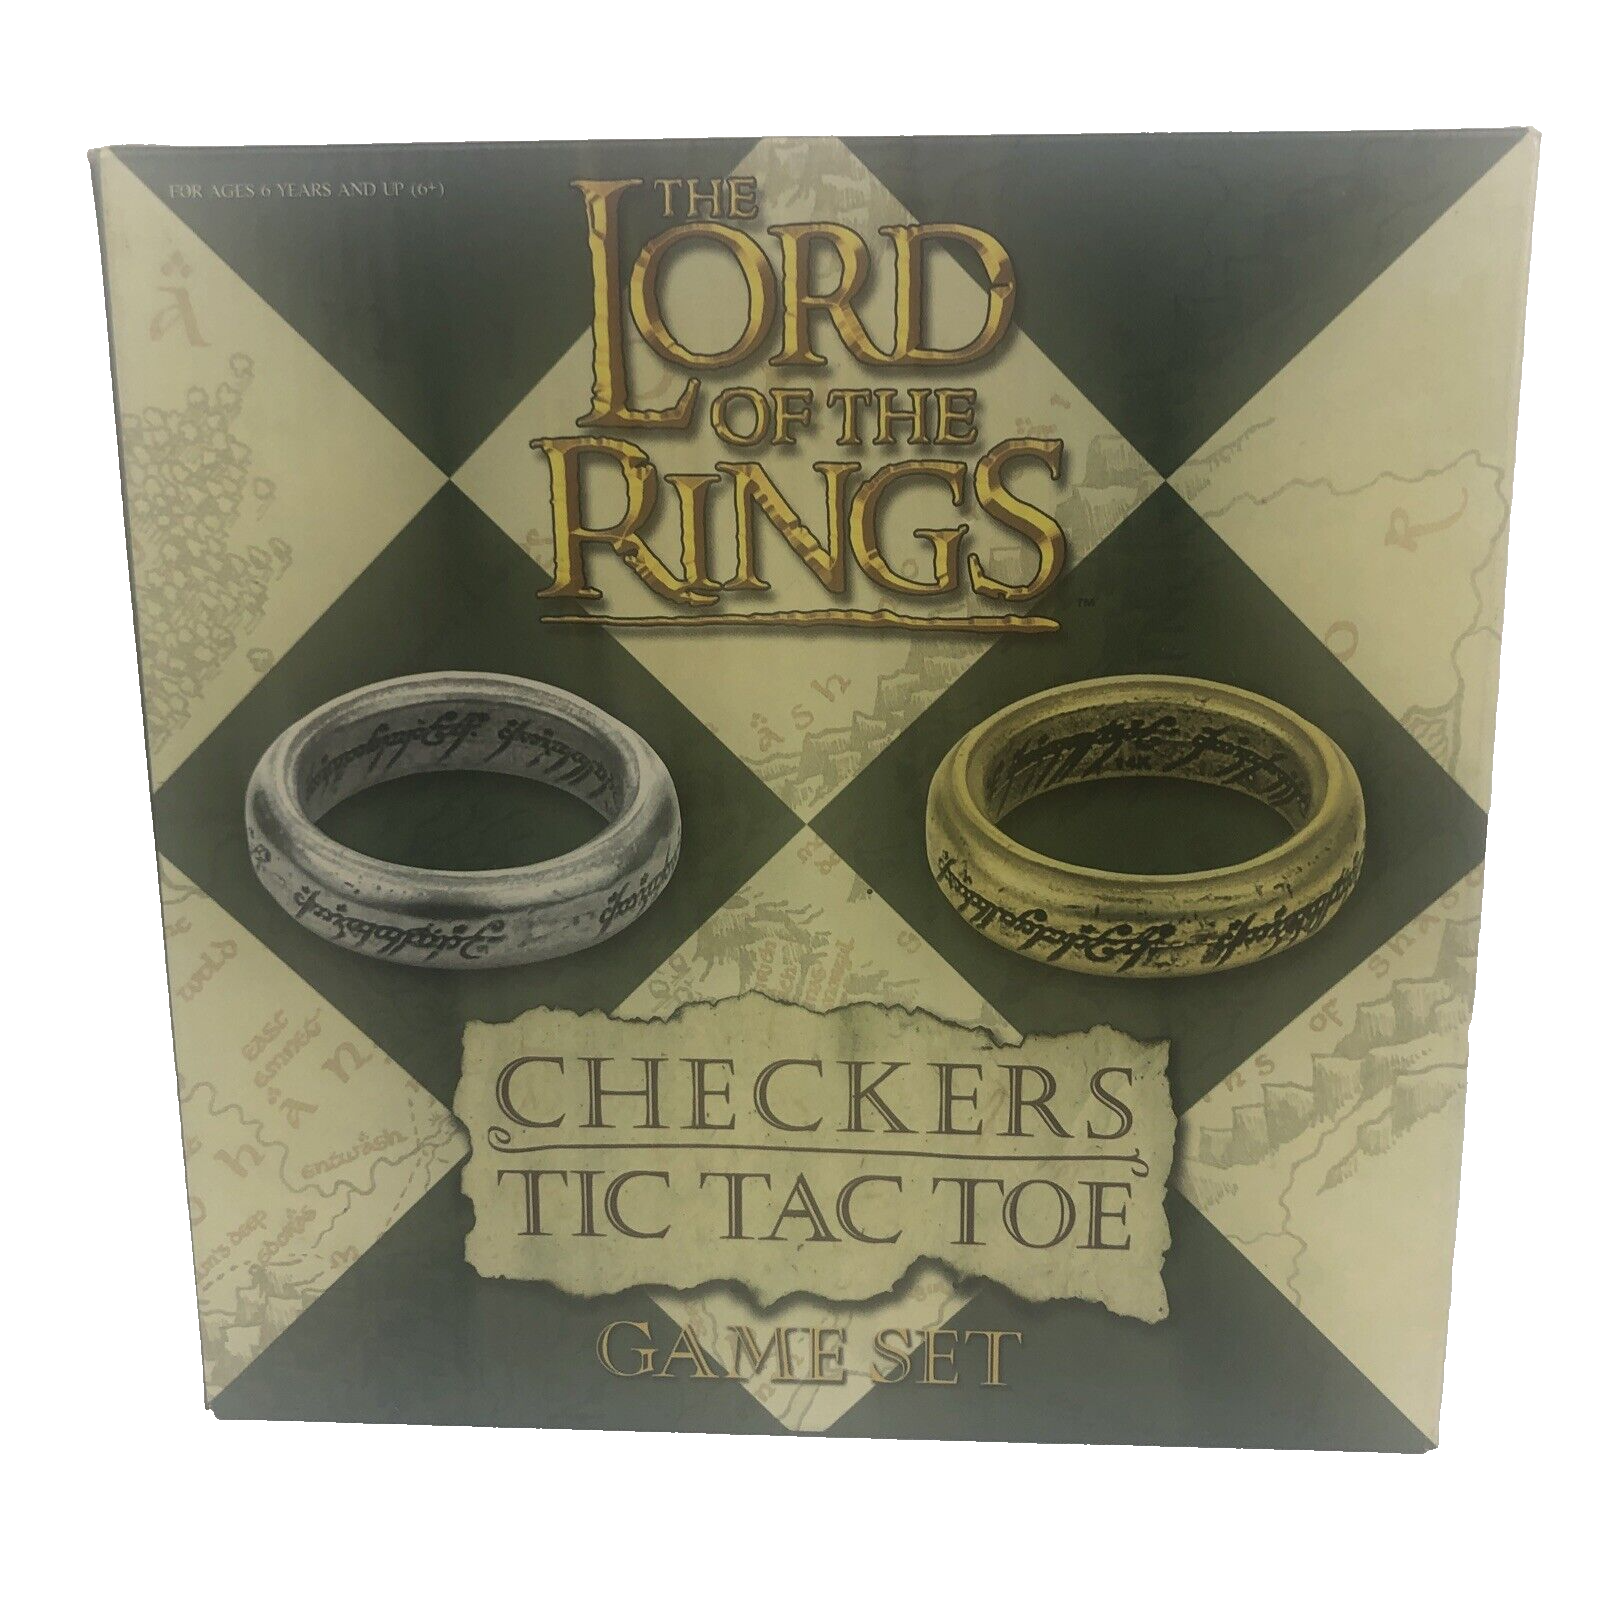 Lord Of The Rings Checkers Tic Tac Toe Game Set USAopoly with Rings Tokens - $12.35